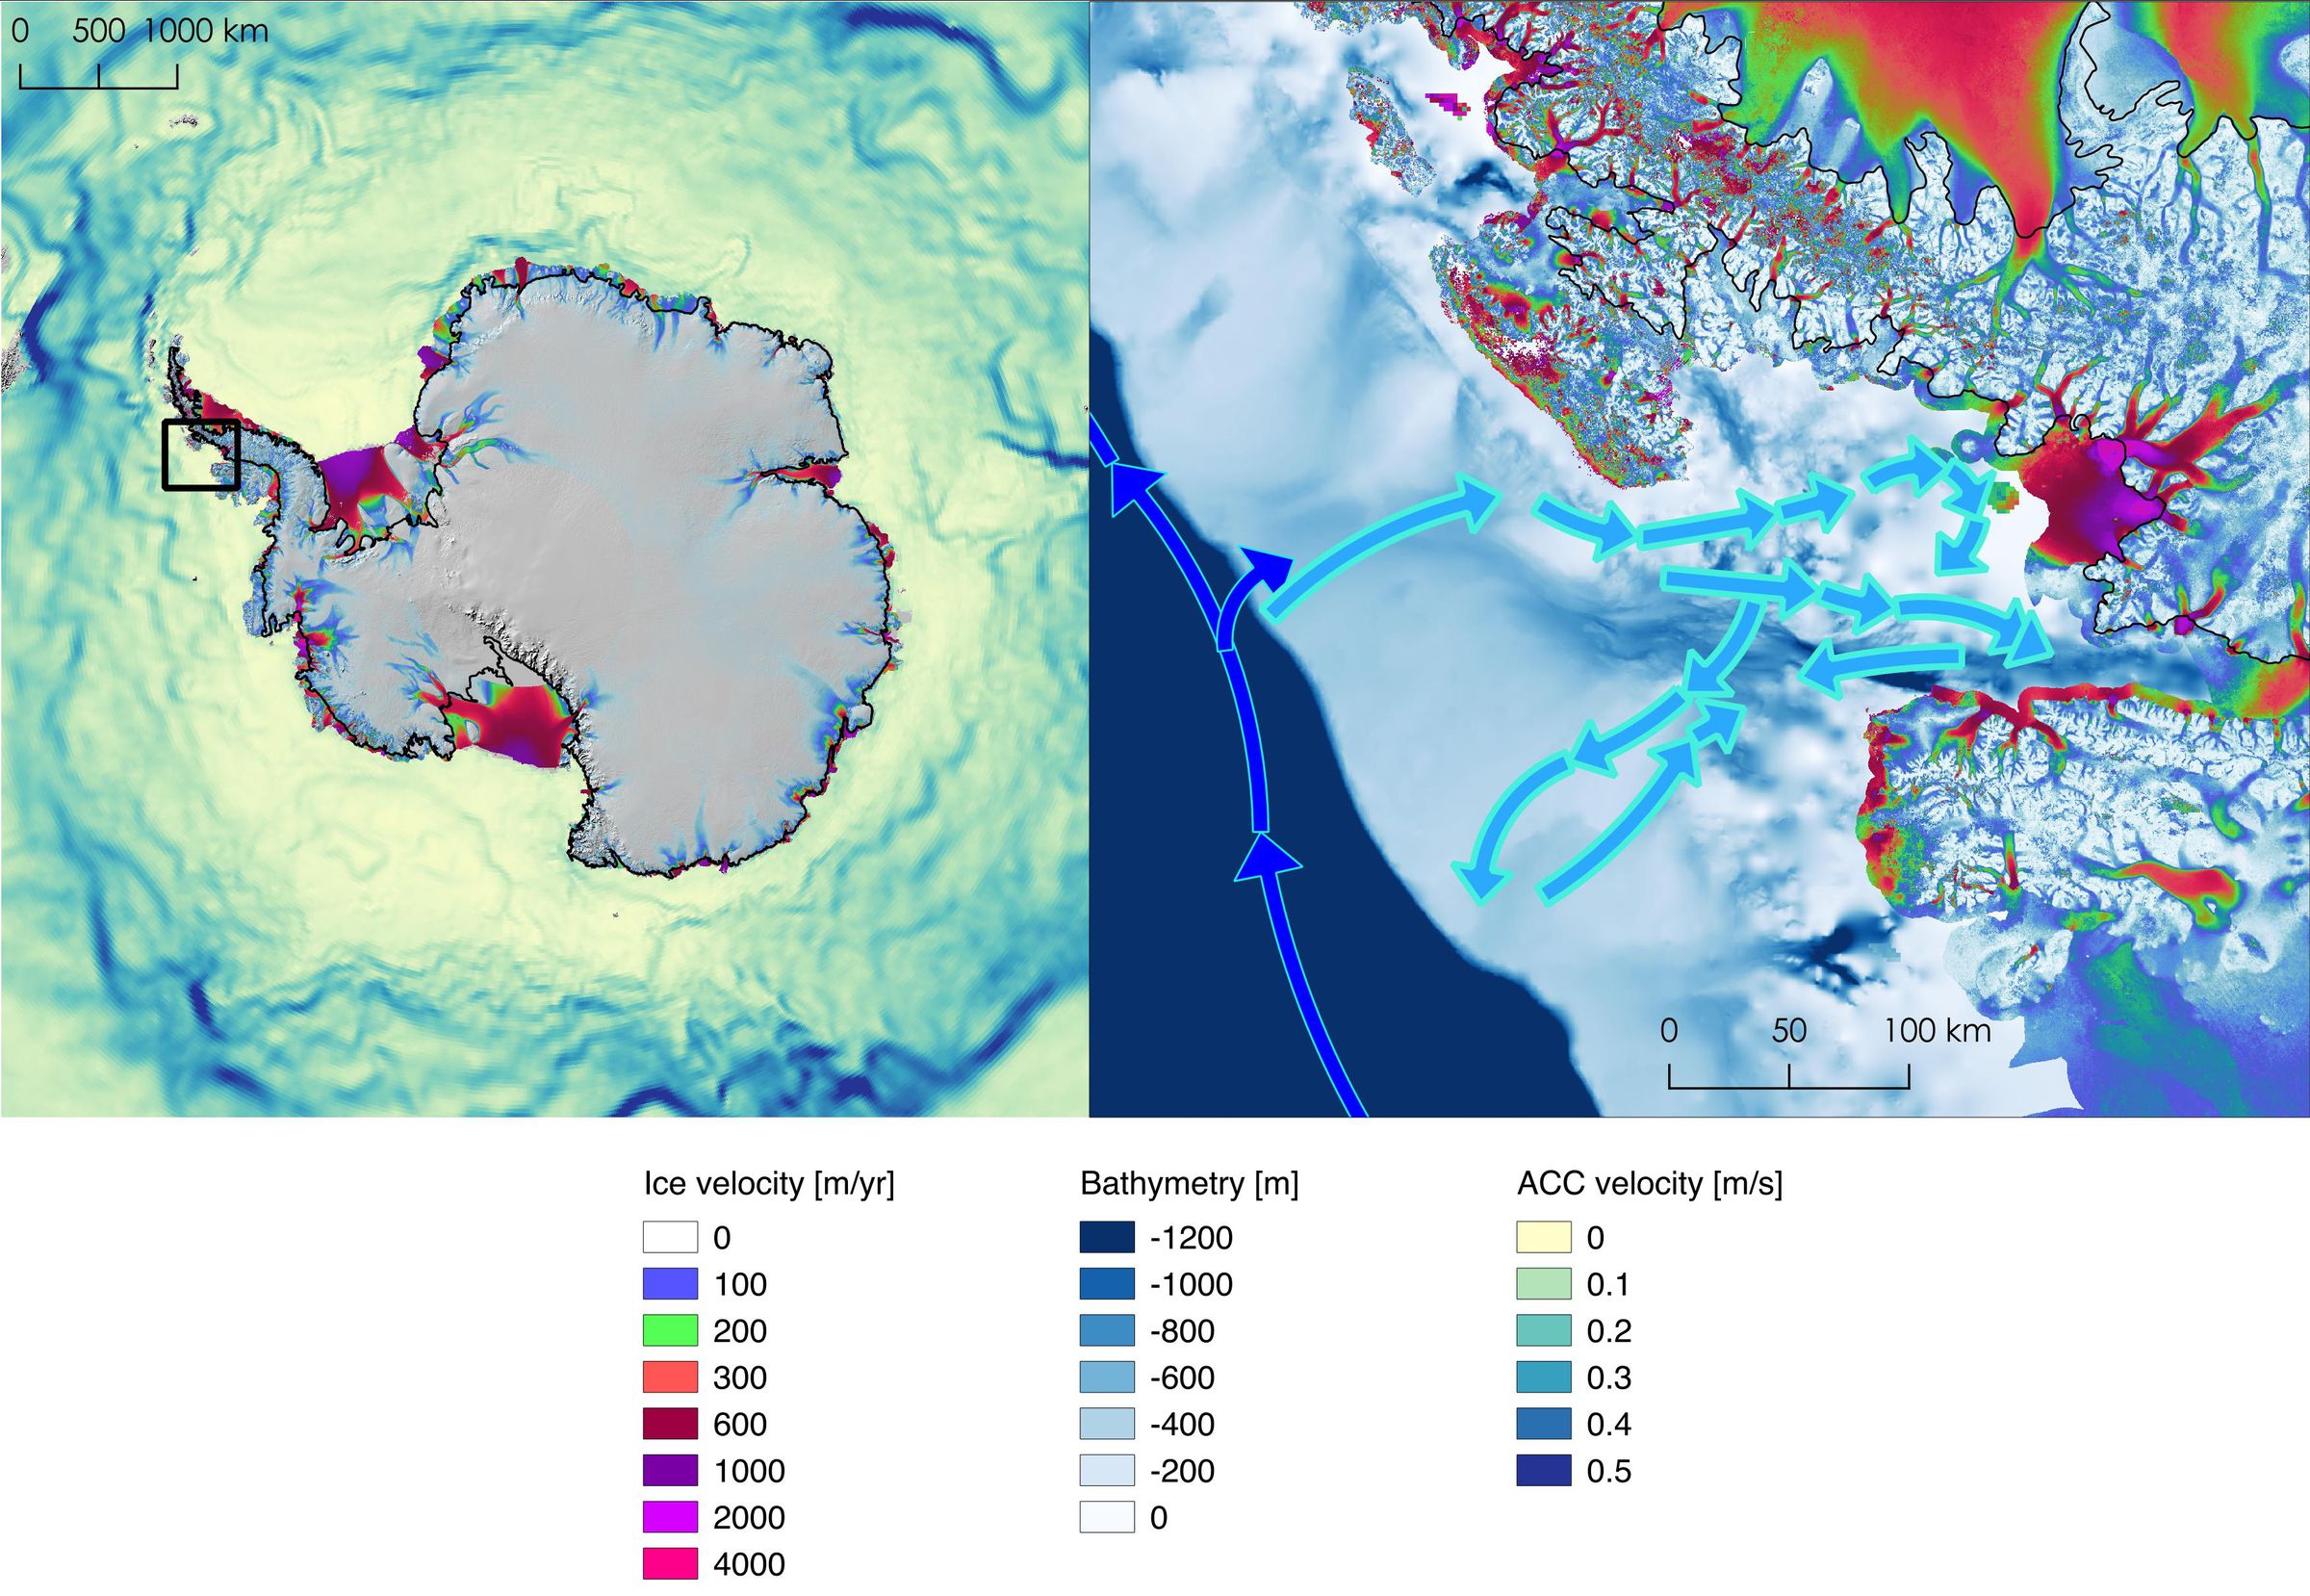 Location of Marguerite Bay in Antarctica (left) and ice velocities, ocean depth, and currents in the bay (right).